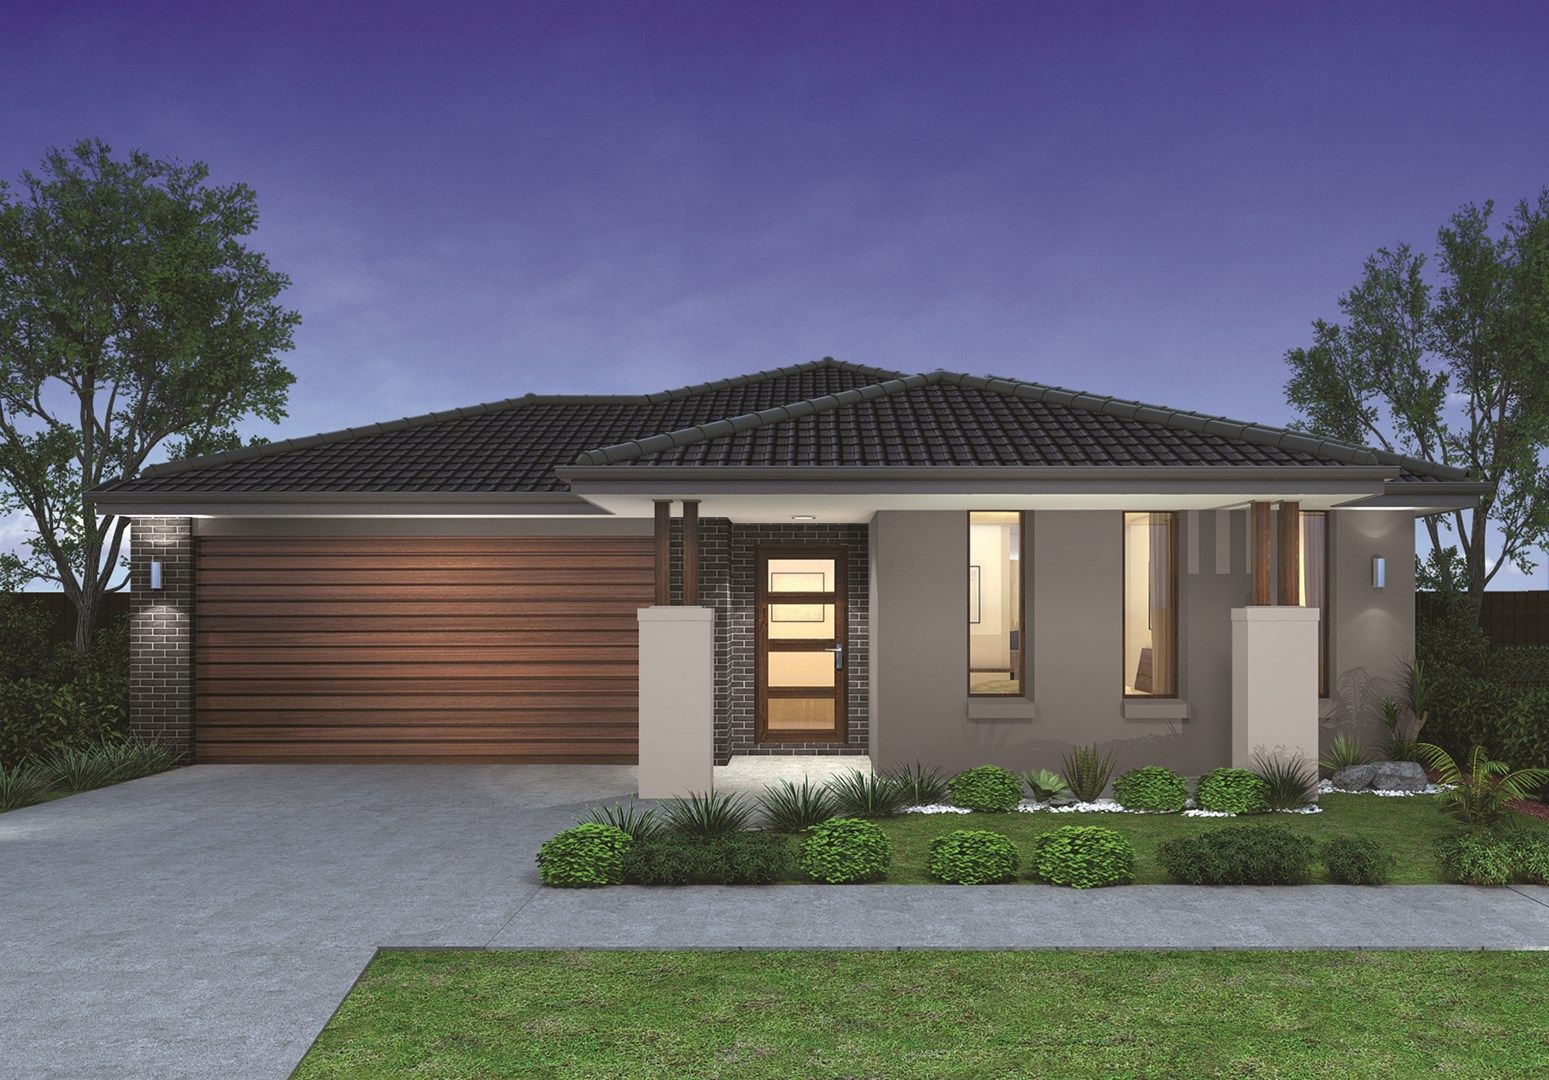 4 bedrooms New House & Land in Lot 1139 Harold Street DEANSIDE VIC, 3336